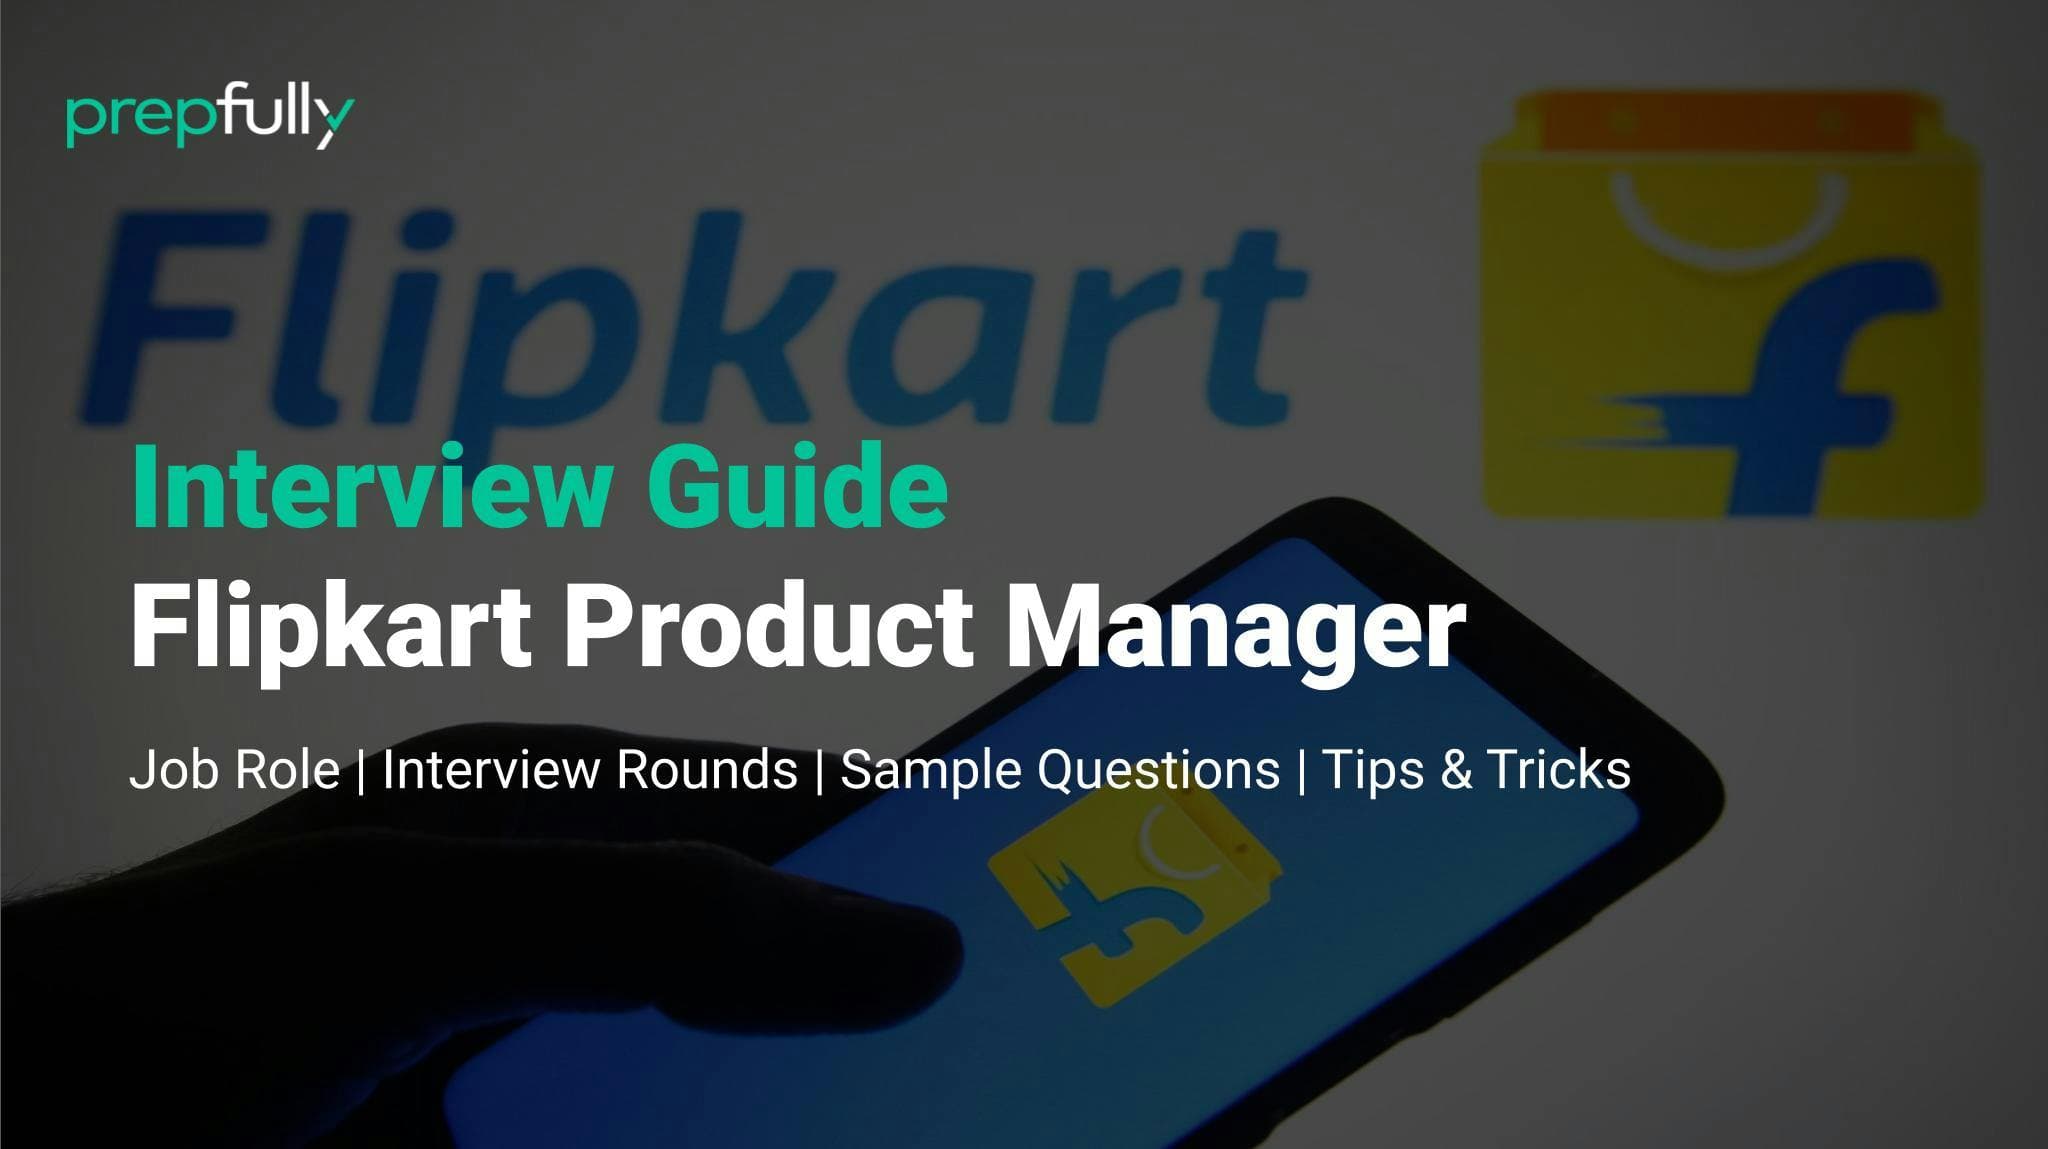 Interview guide for Flipkart Product Manager